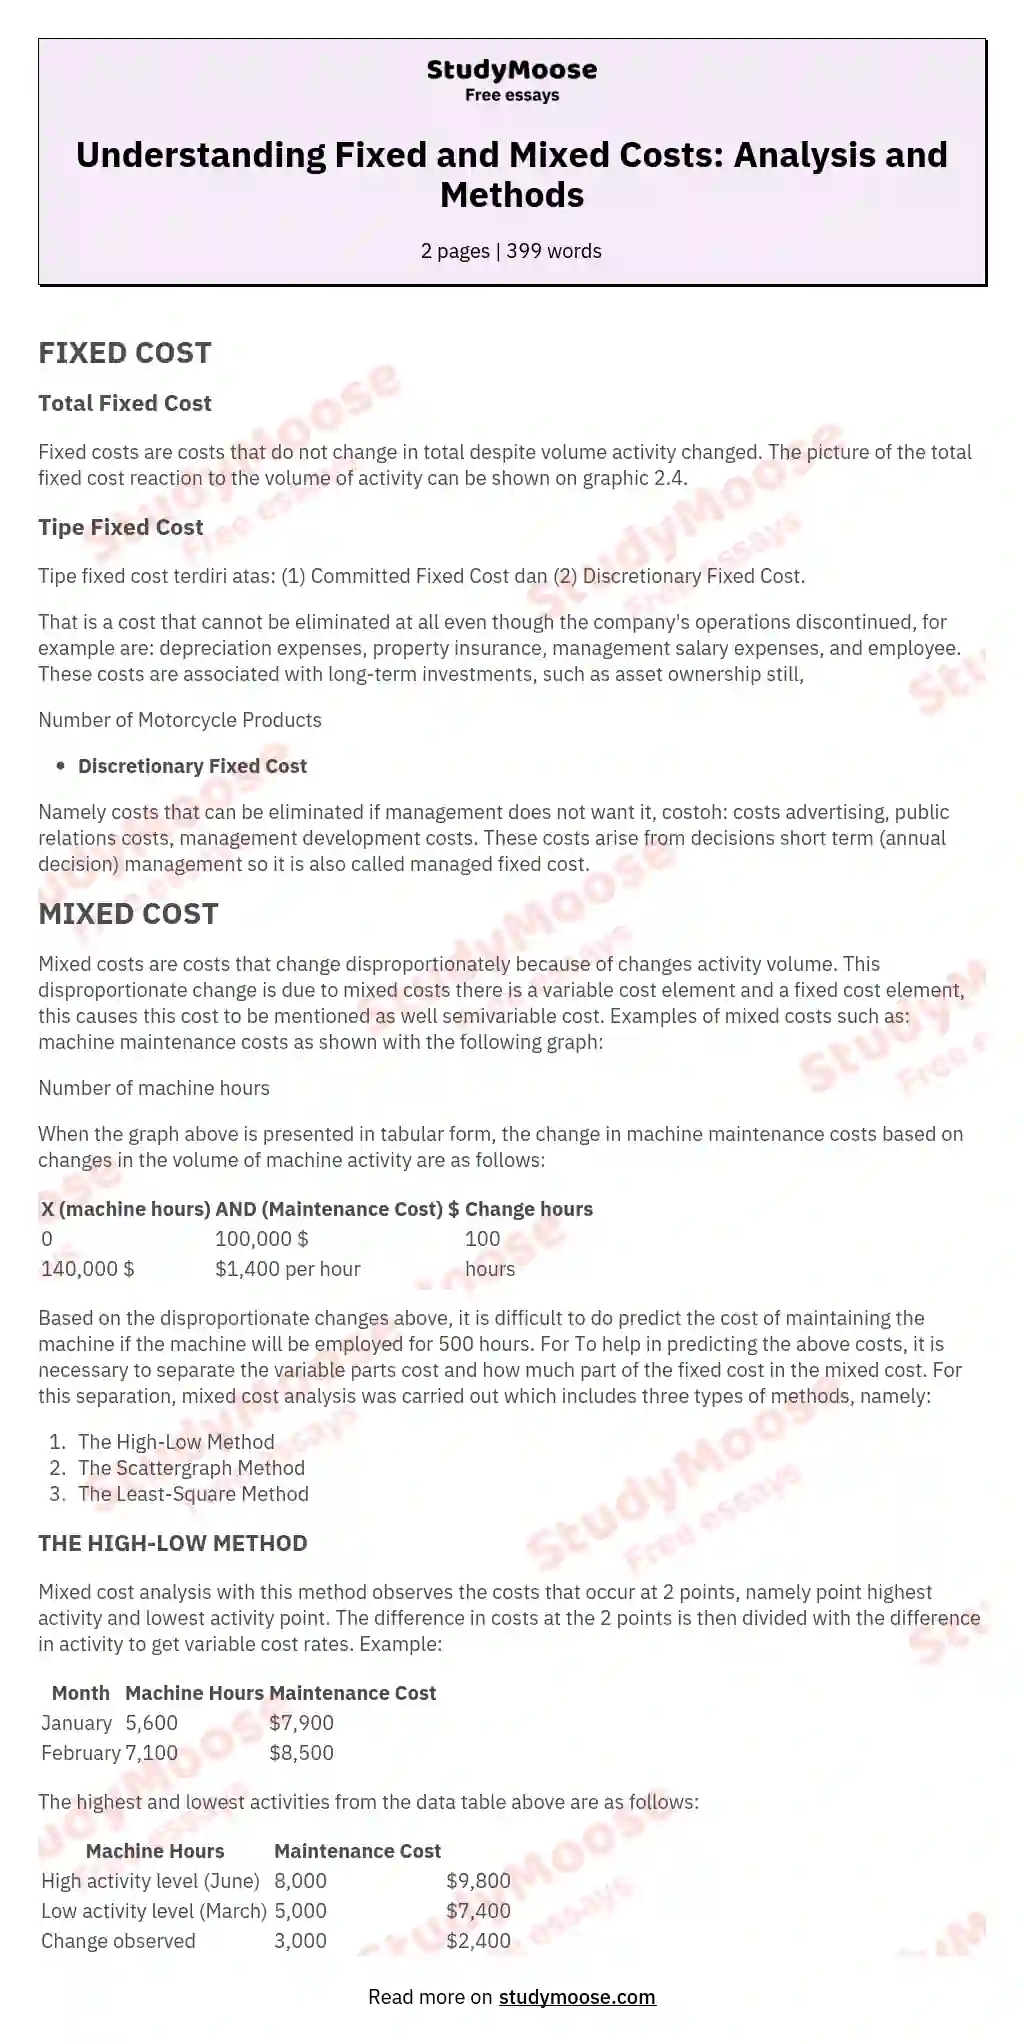 Understanding Fixed and Mixed Costs: Analysis and Methods essay